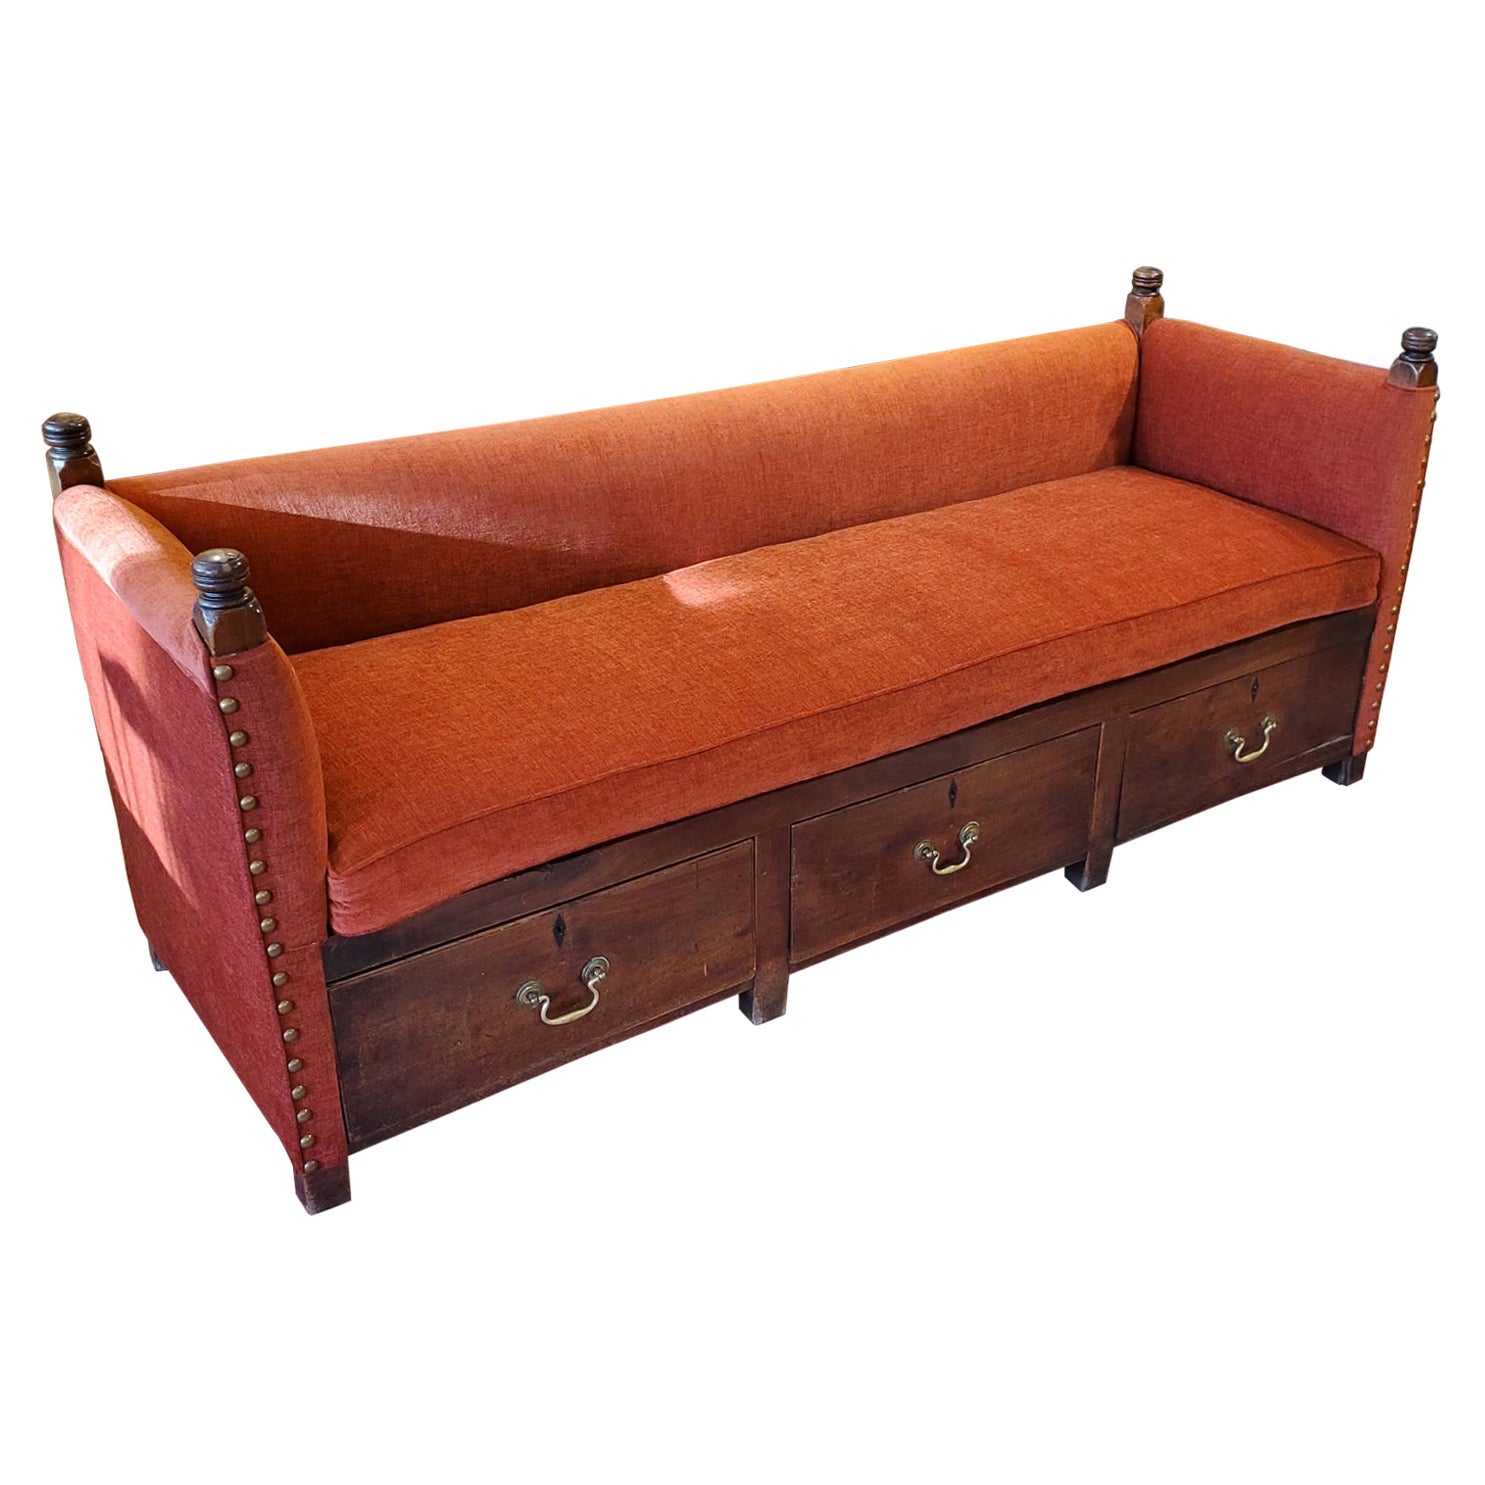 19th Century English Oak Bench with Three Drawers and Persimmon Upholstery For Sale